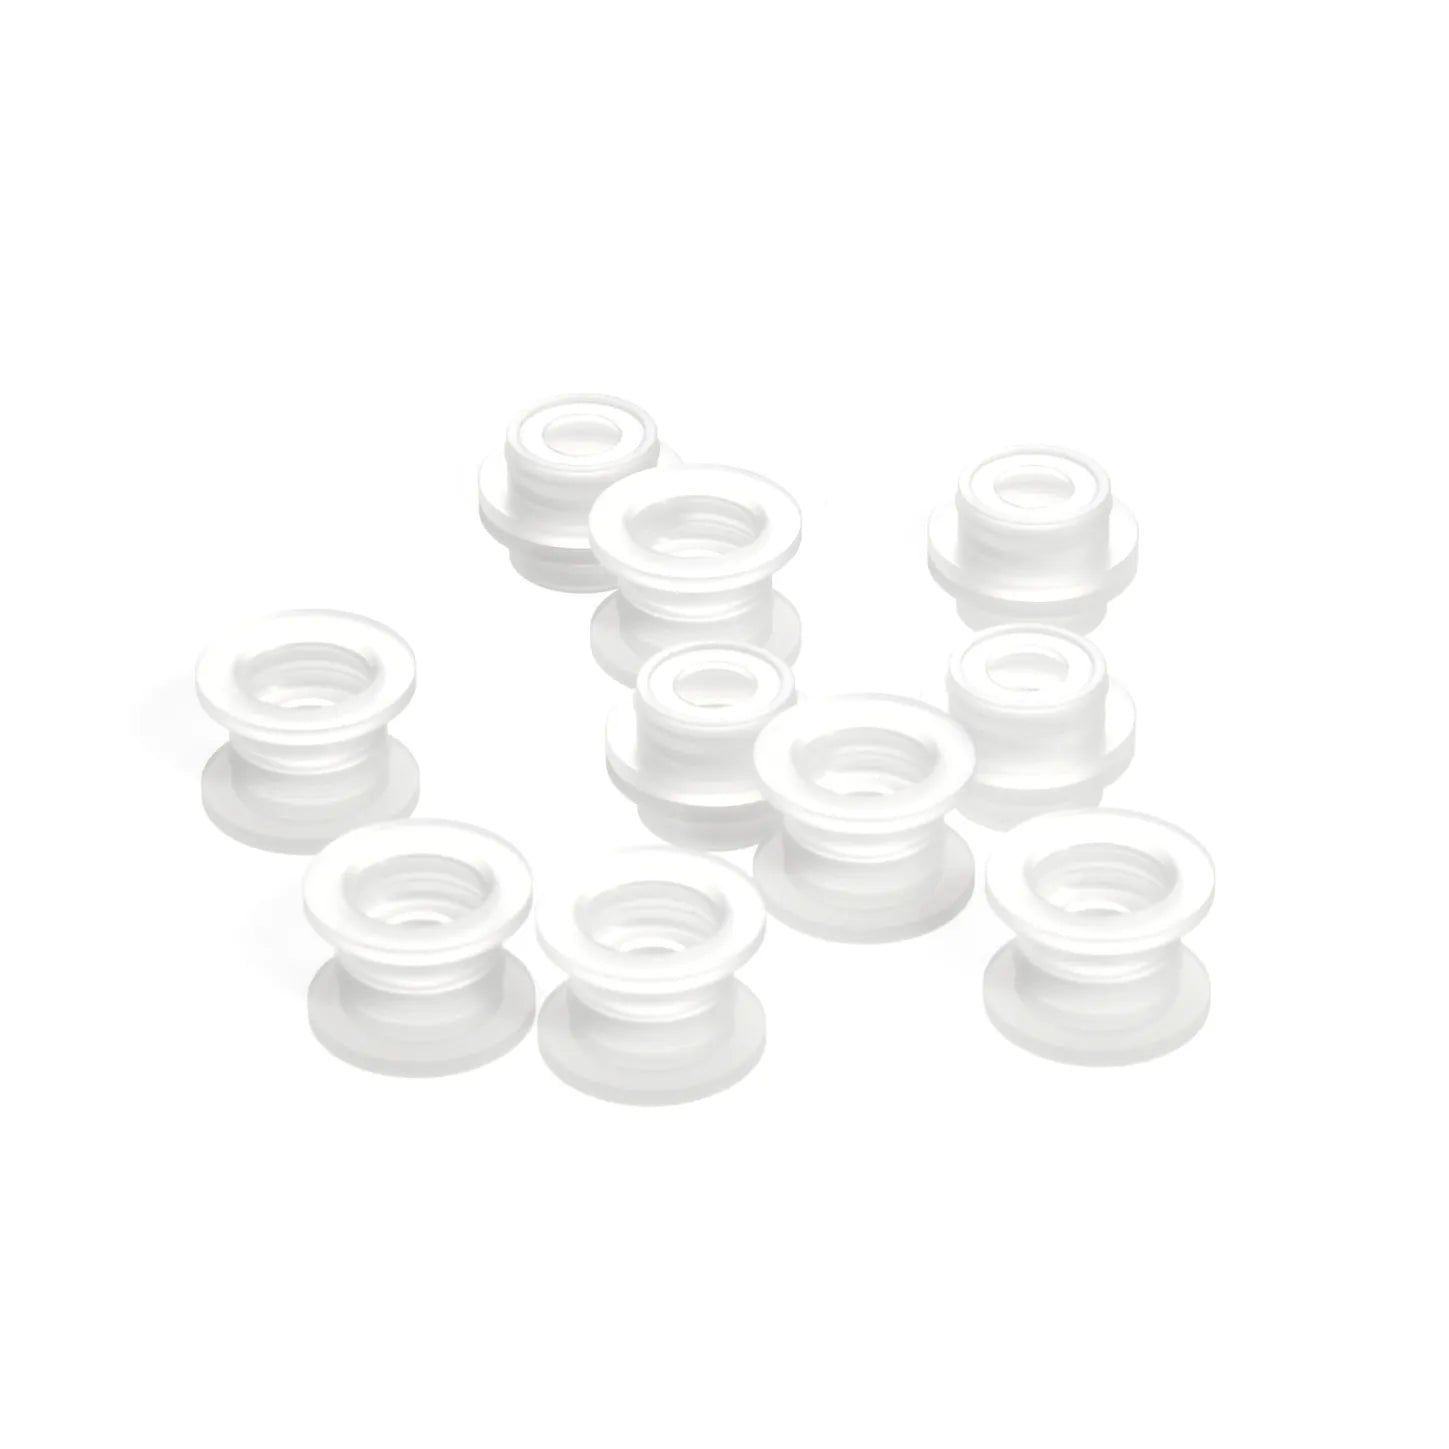 Rinse Port Cap (w/hole), 10/pk, Comparable to Shimadzu # 228-48331-92